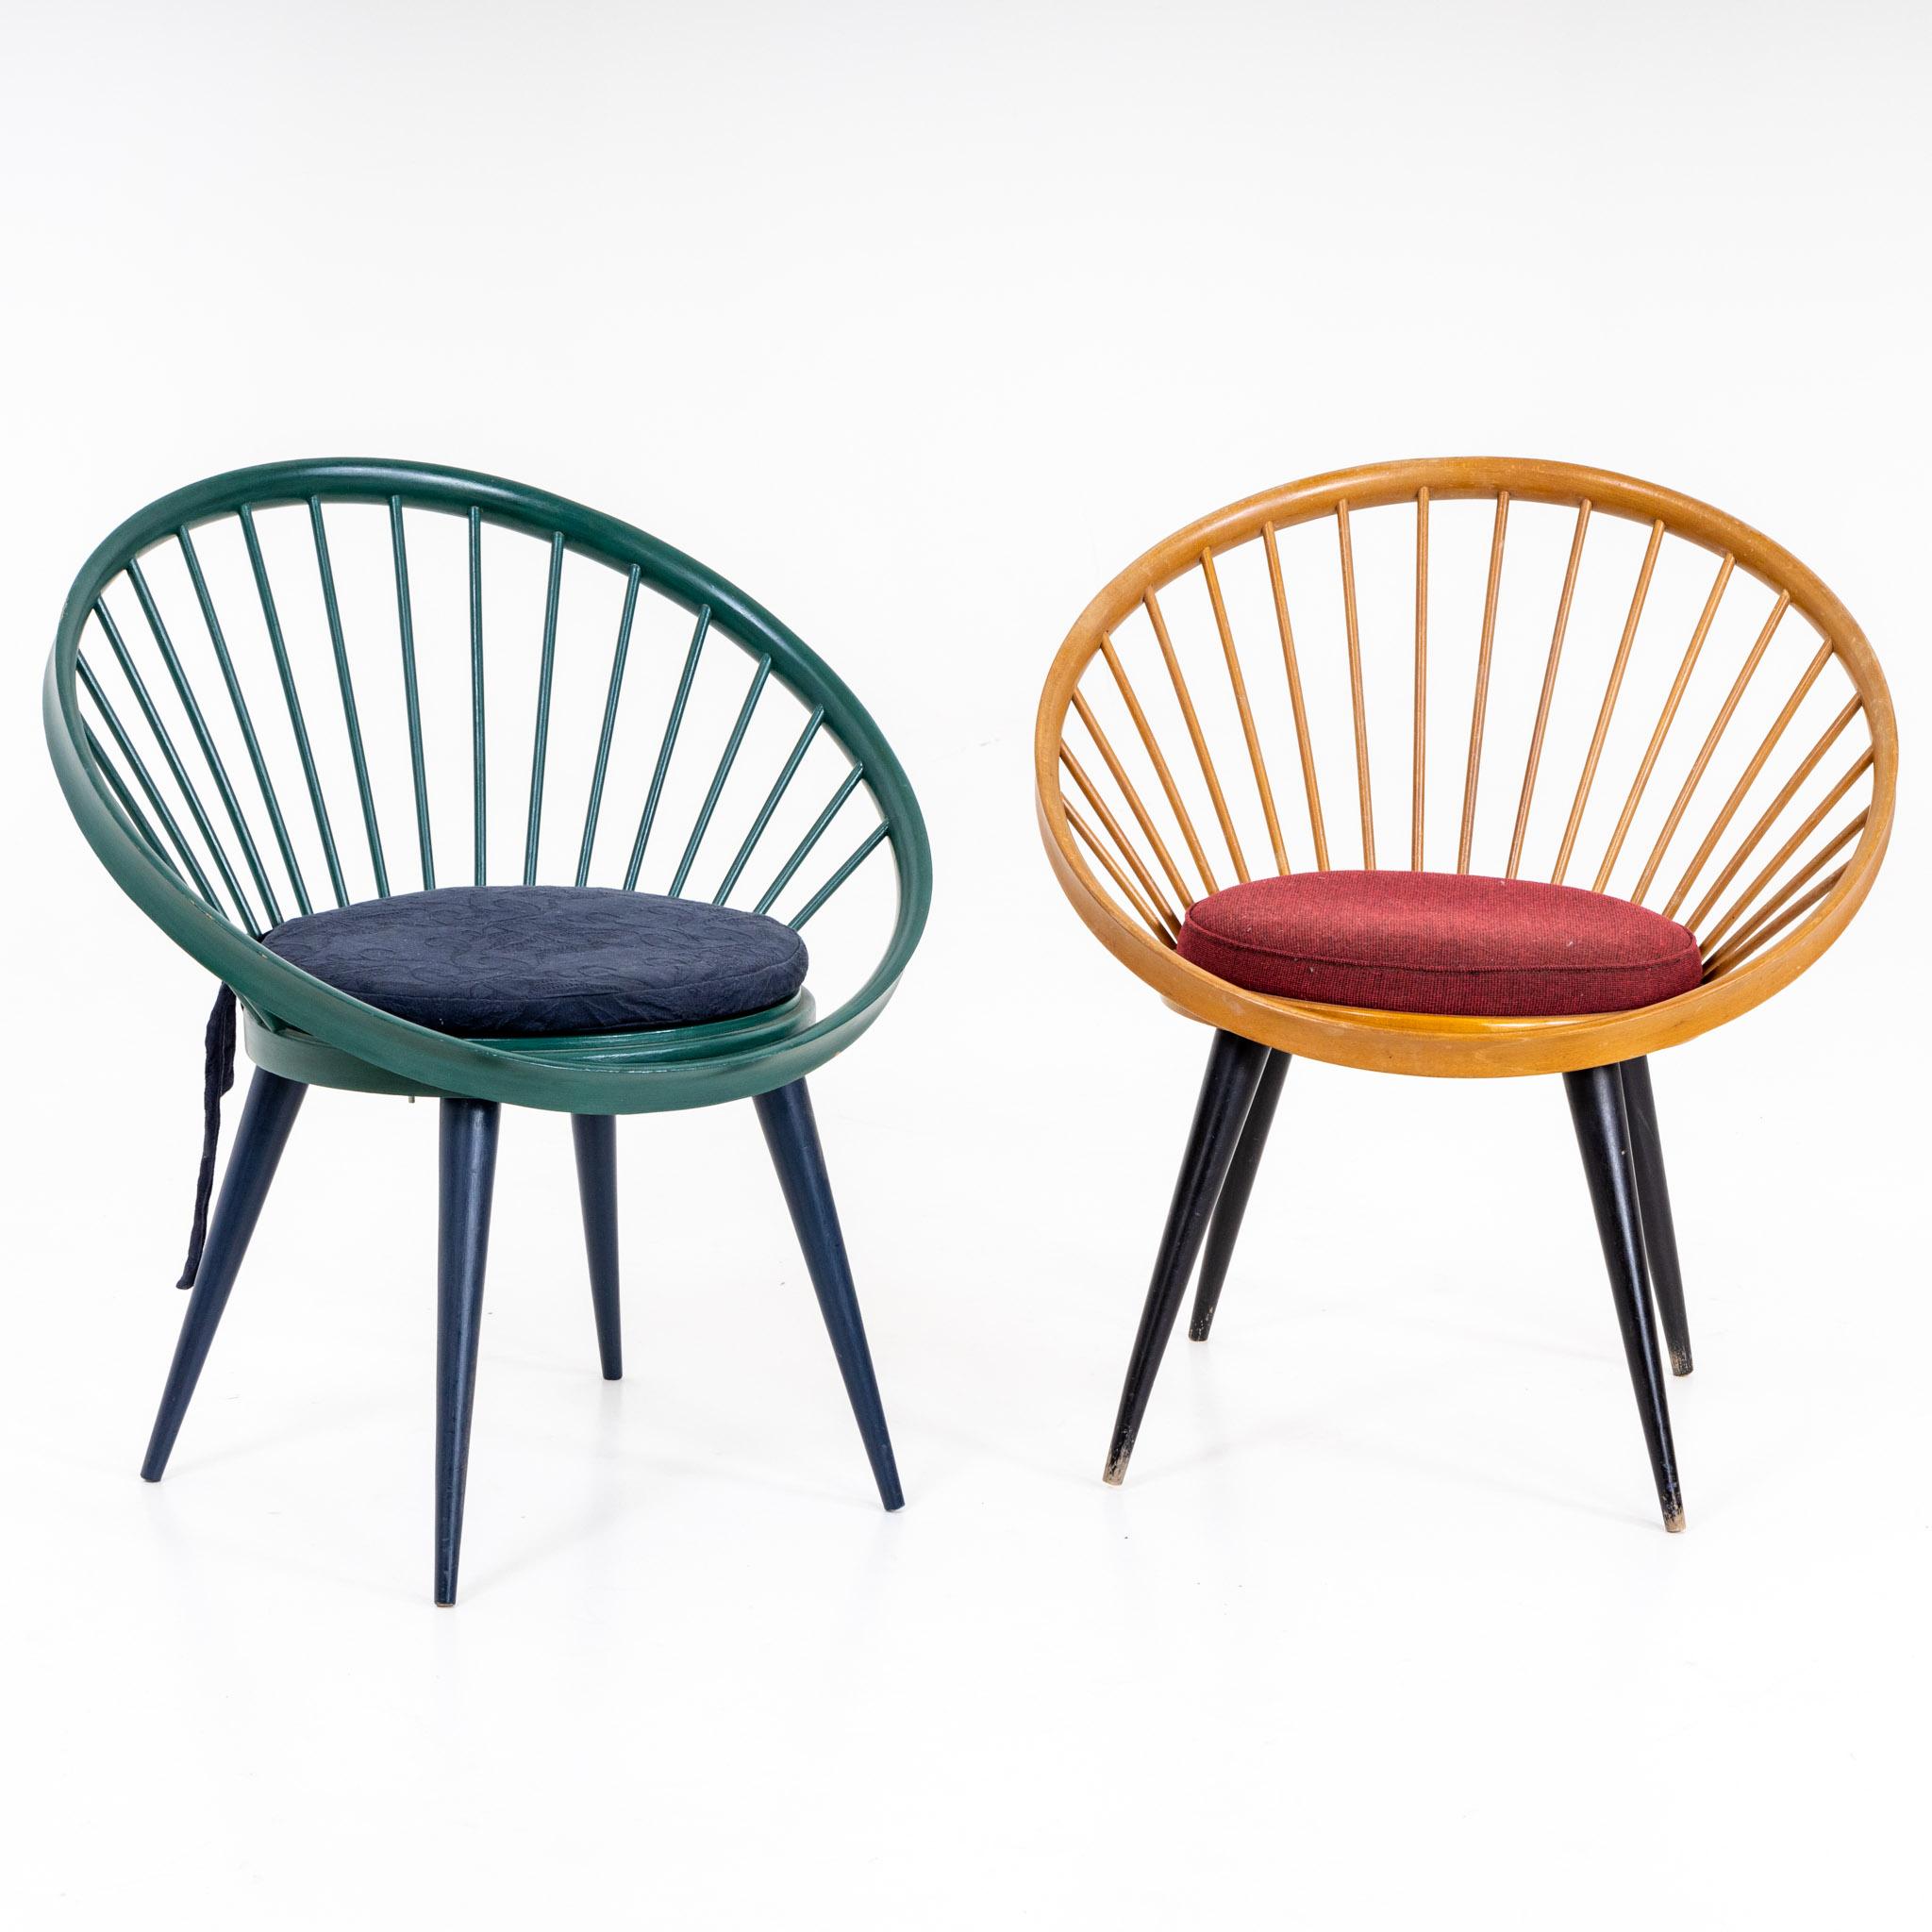 Pair of Circle chairs by Yngve Ekström on square pointed feet in blue-green and black-yellow respectively. The color may have been renewed once.